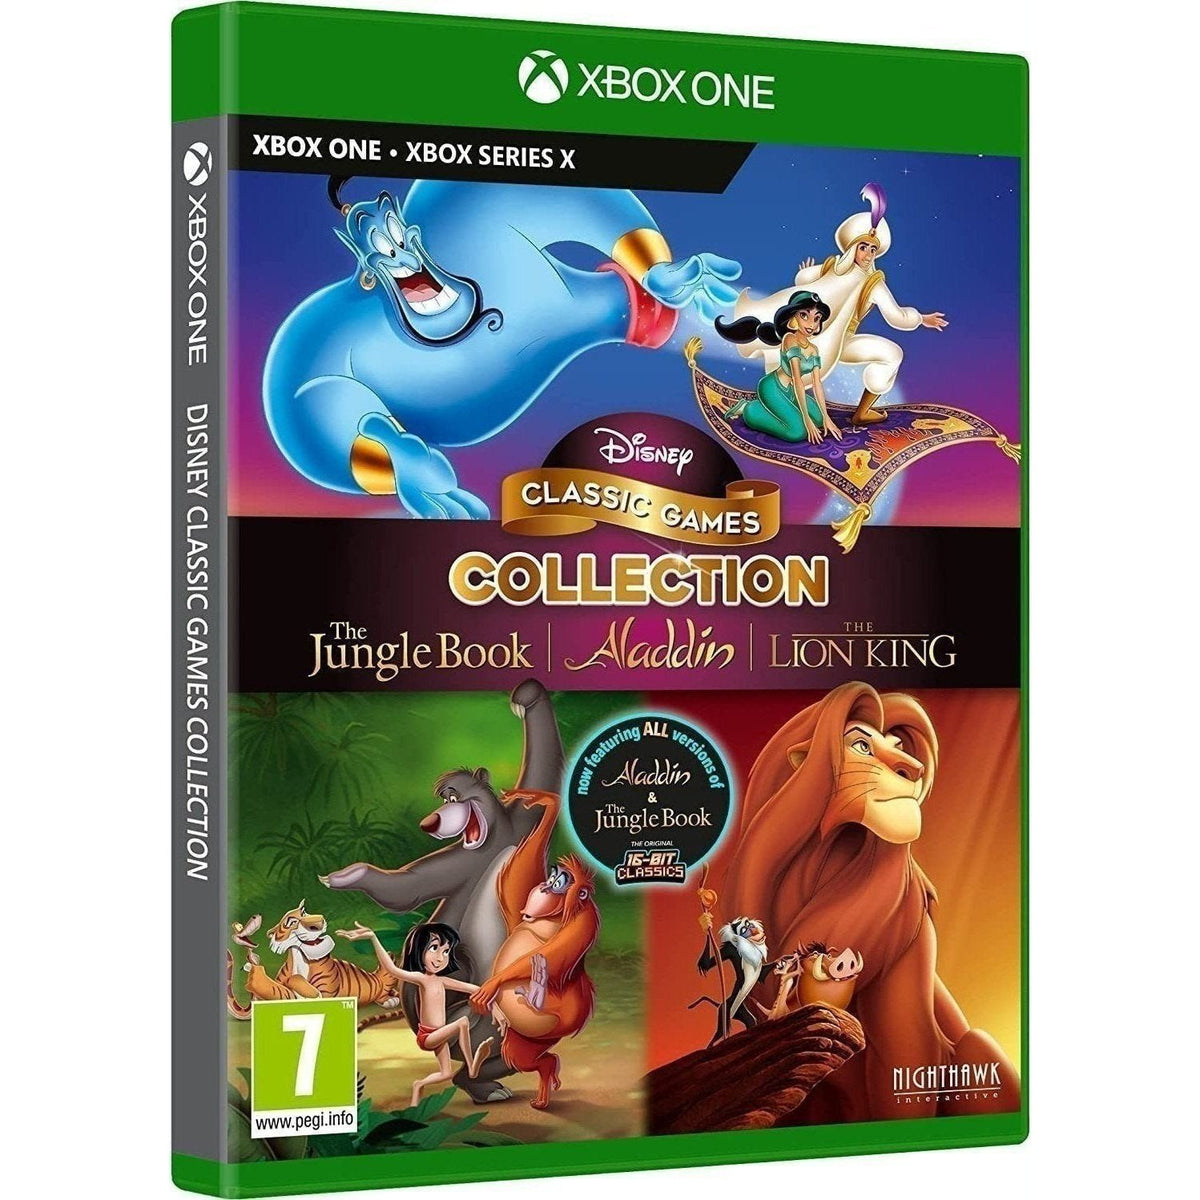 Disney Classic Games Collection: The Jungle Book, Aladdin & The Lion King Xbox One & Xbox Series X